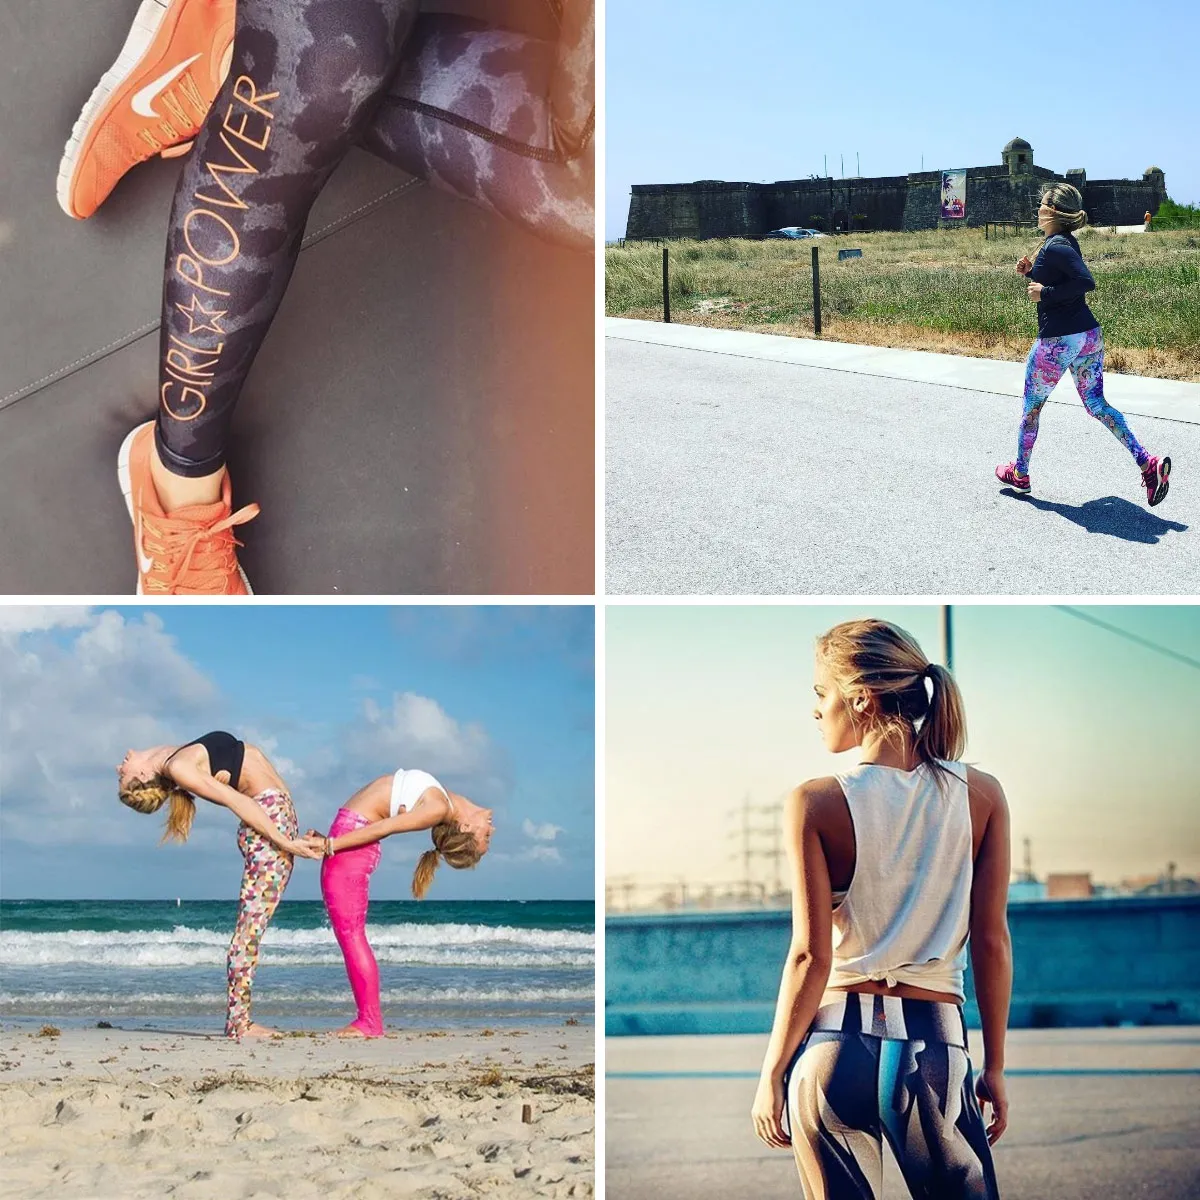 Is the activewear market oversaturated?